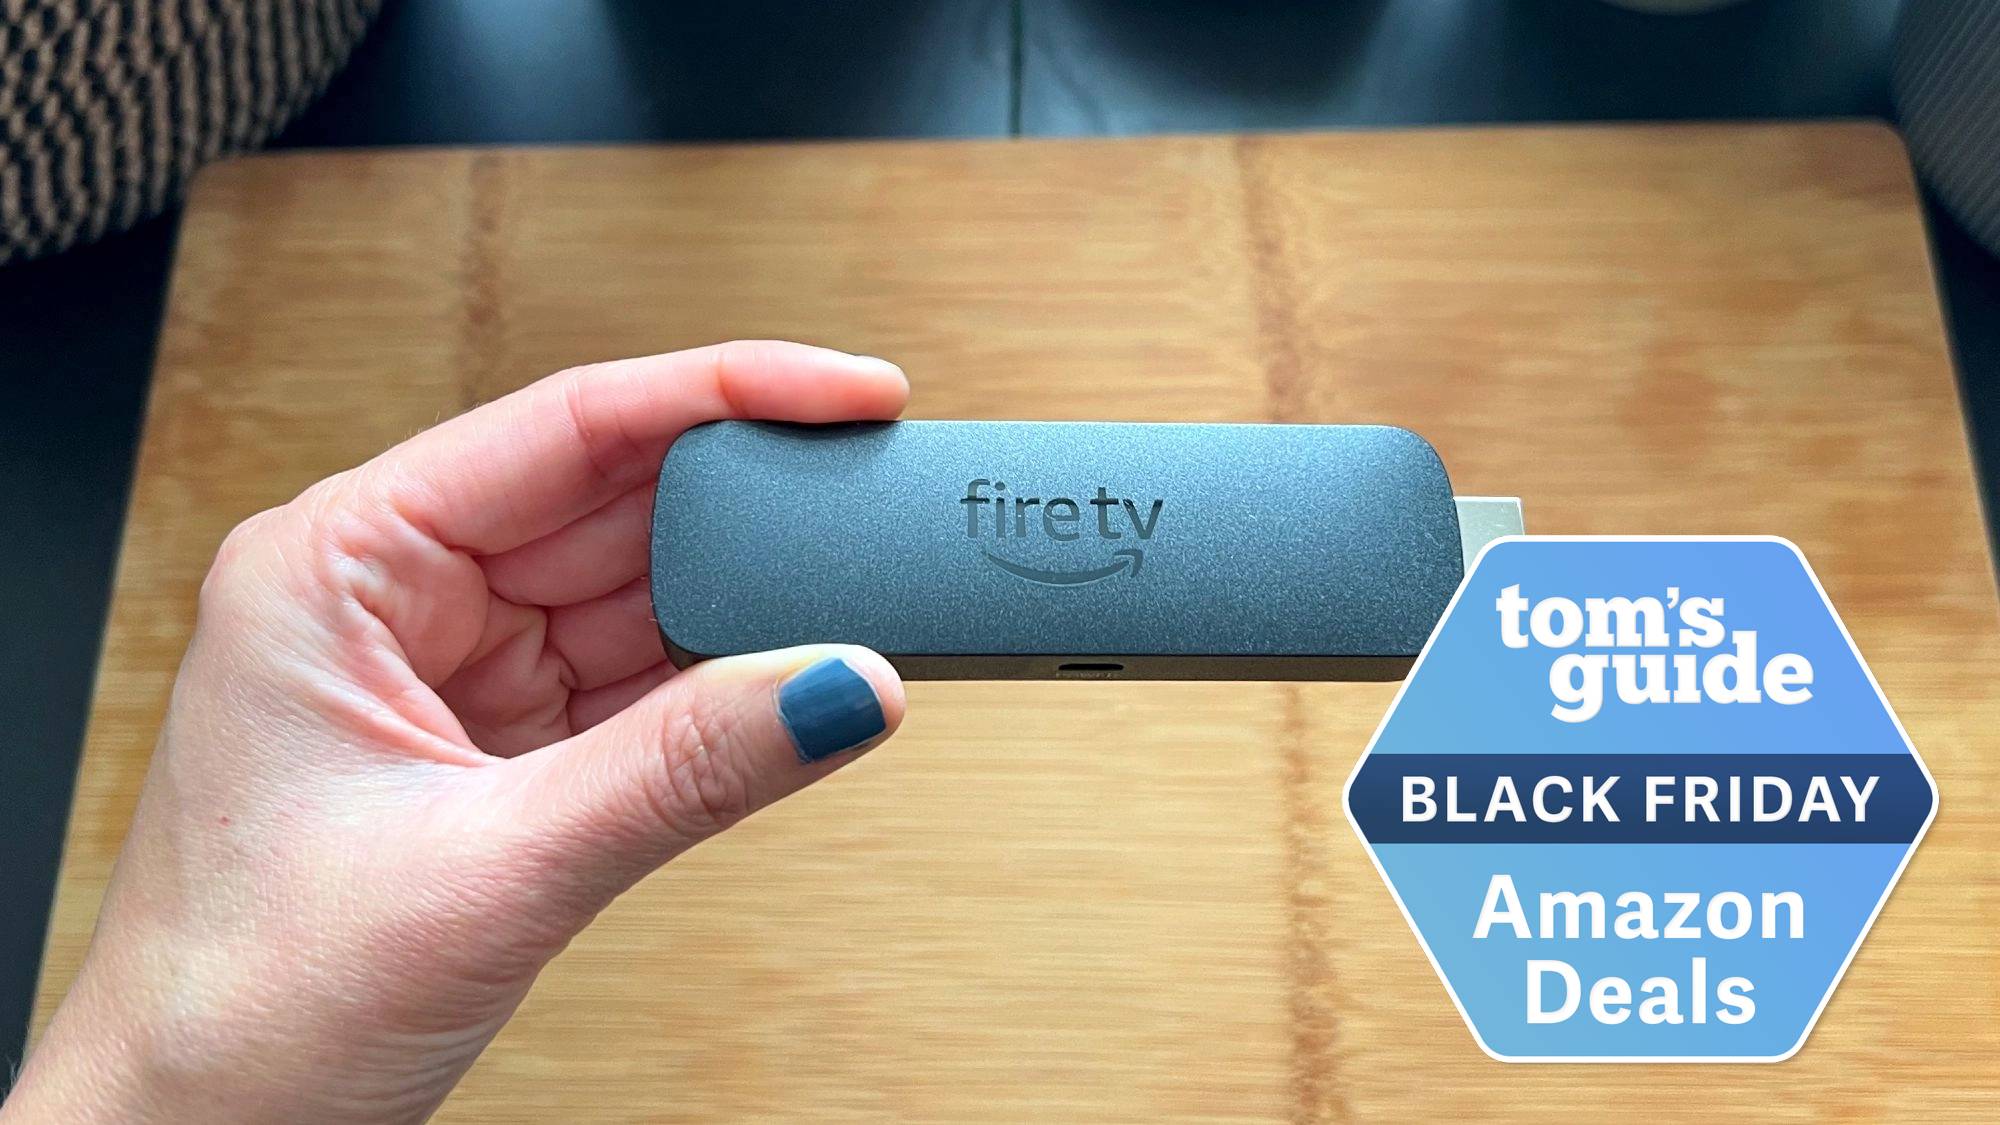 Early Black Friday deal slashes 50% off the Fire TV Stick at